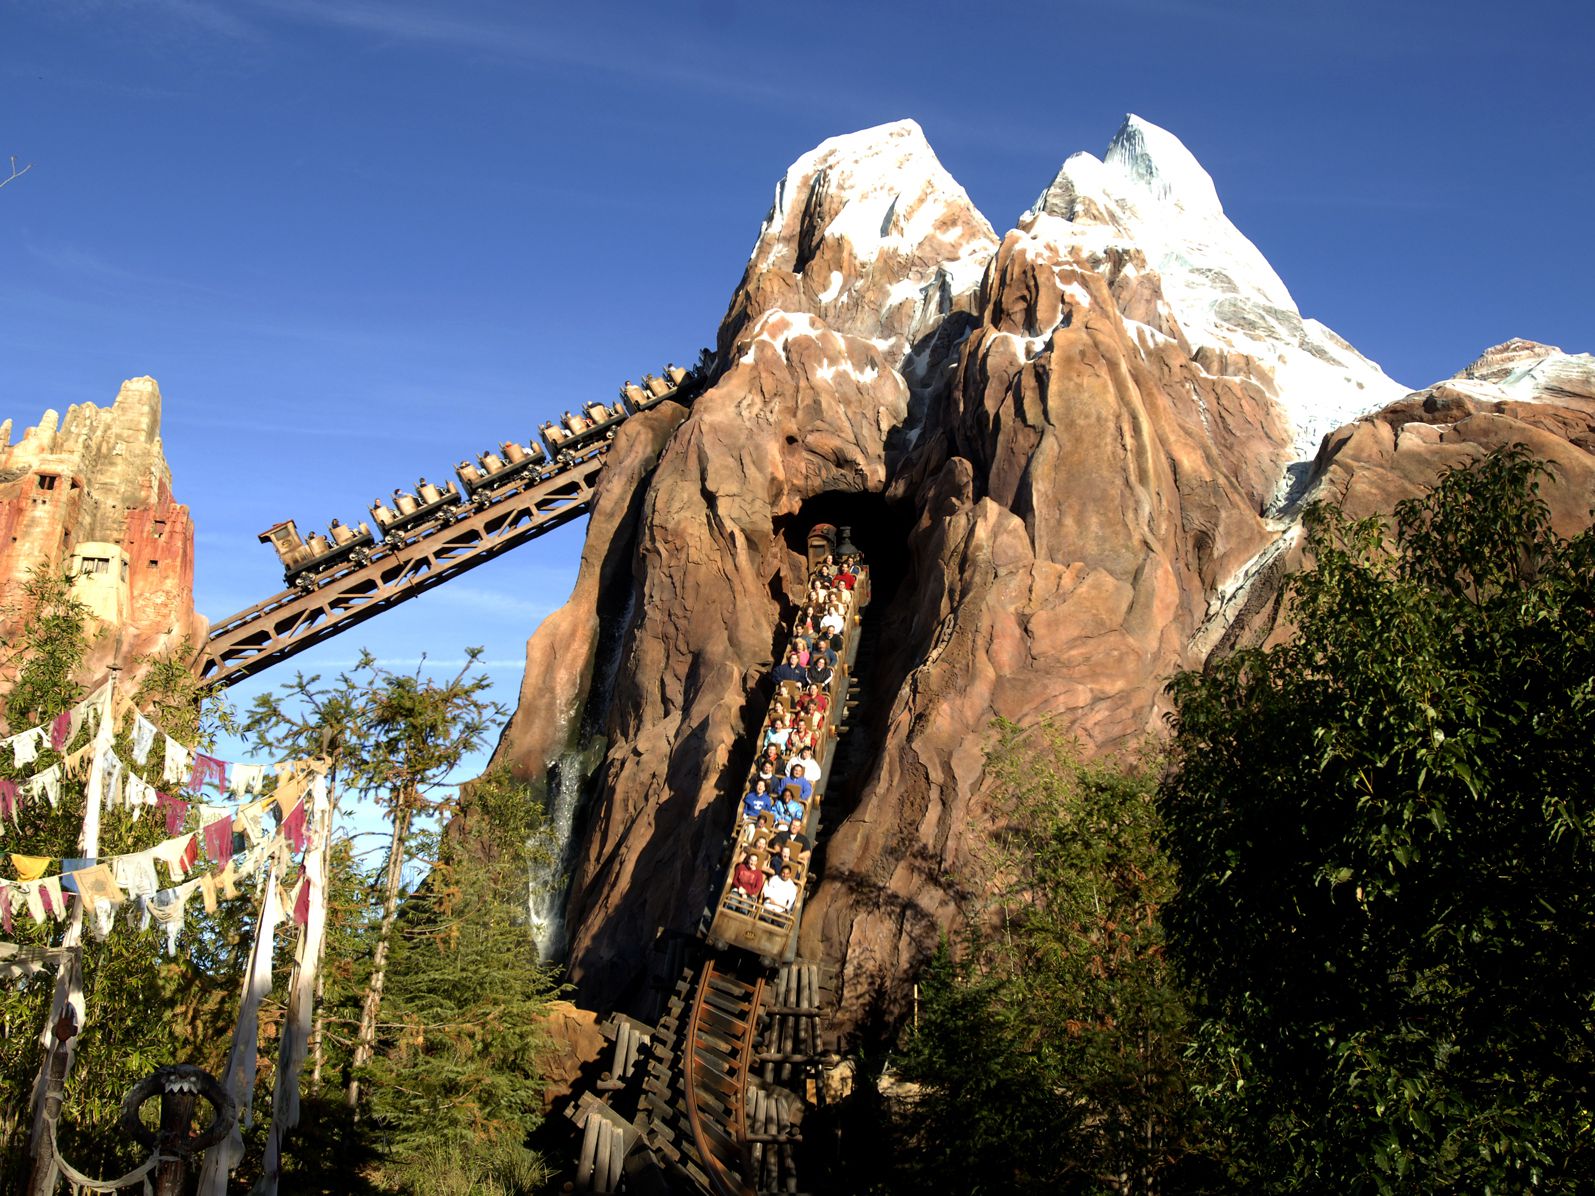 Expedition Everest Disney World - Disney Vacation Planning Guide